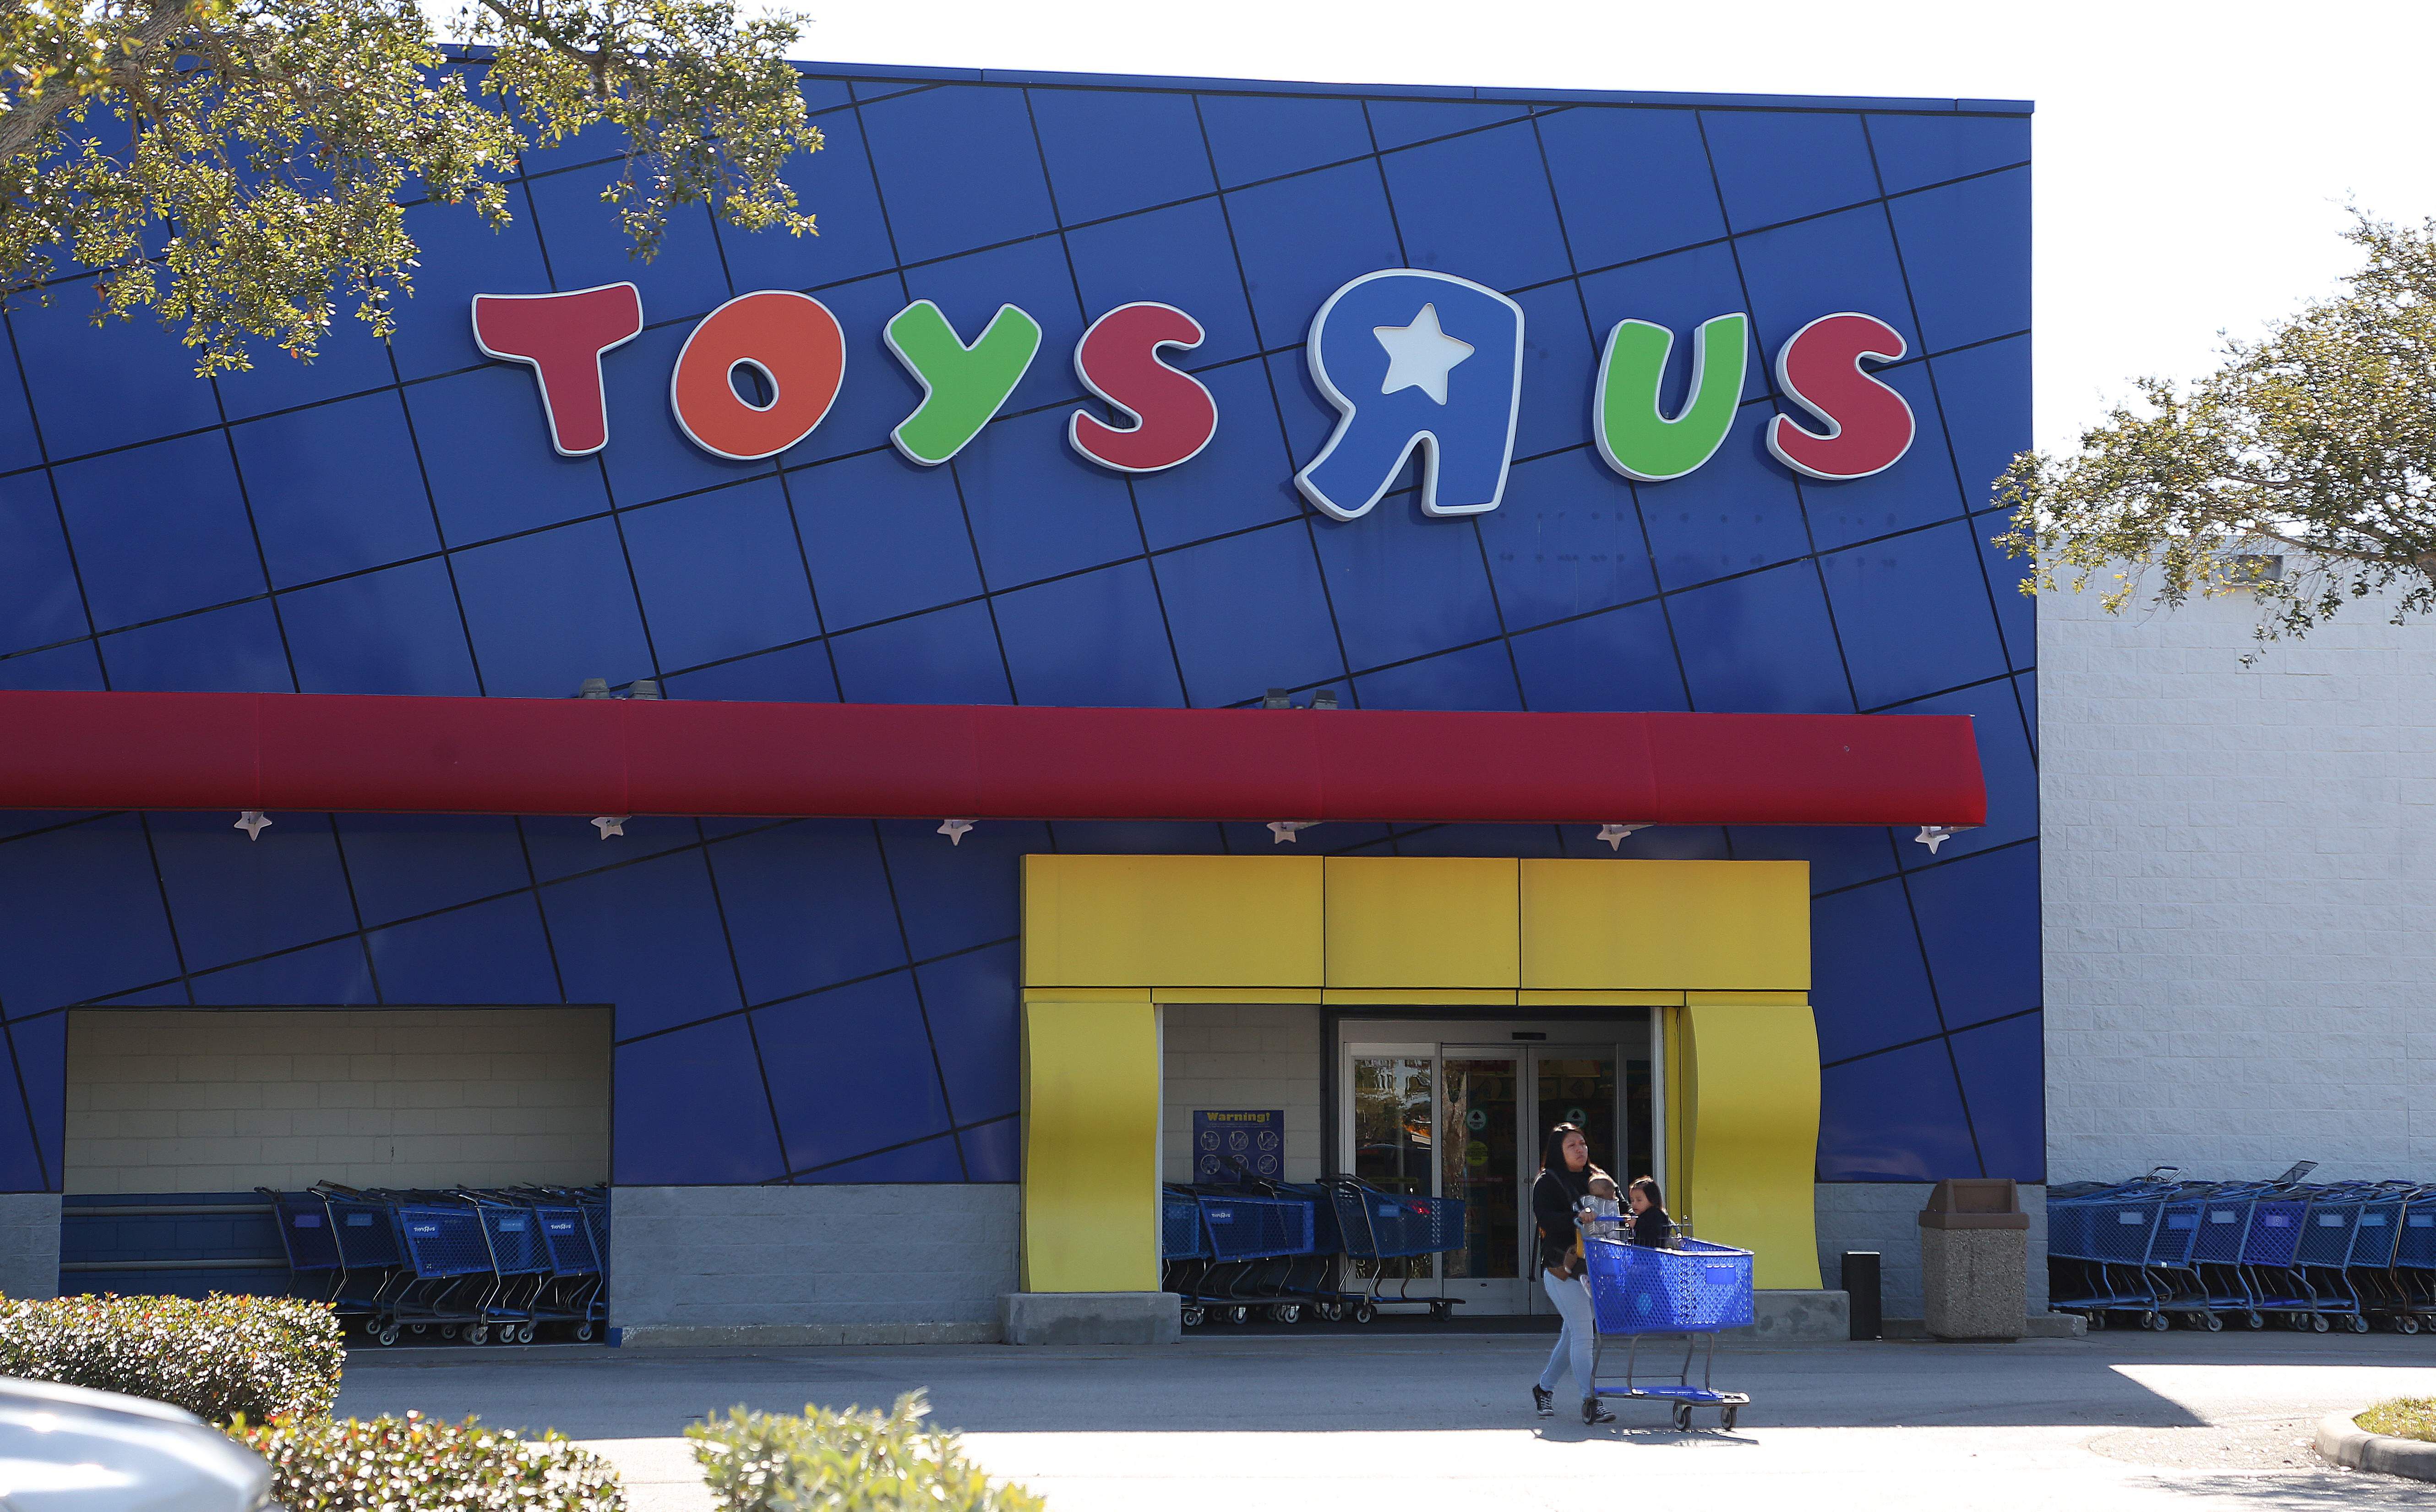 Sæt ud design Army Toys 'R' Us will close or sell all 800 U.S. stores